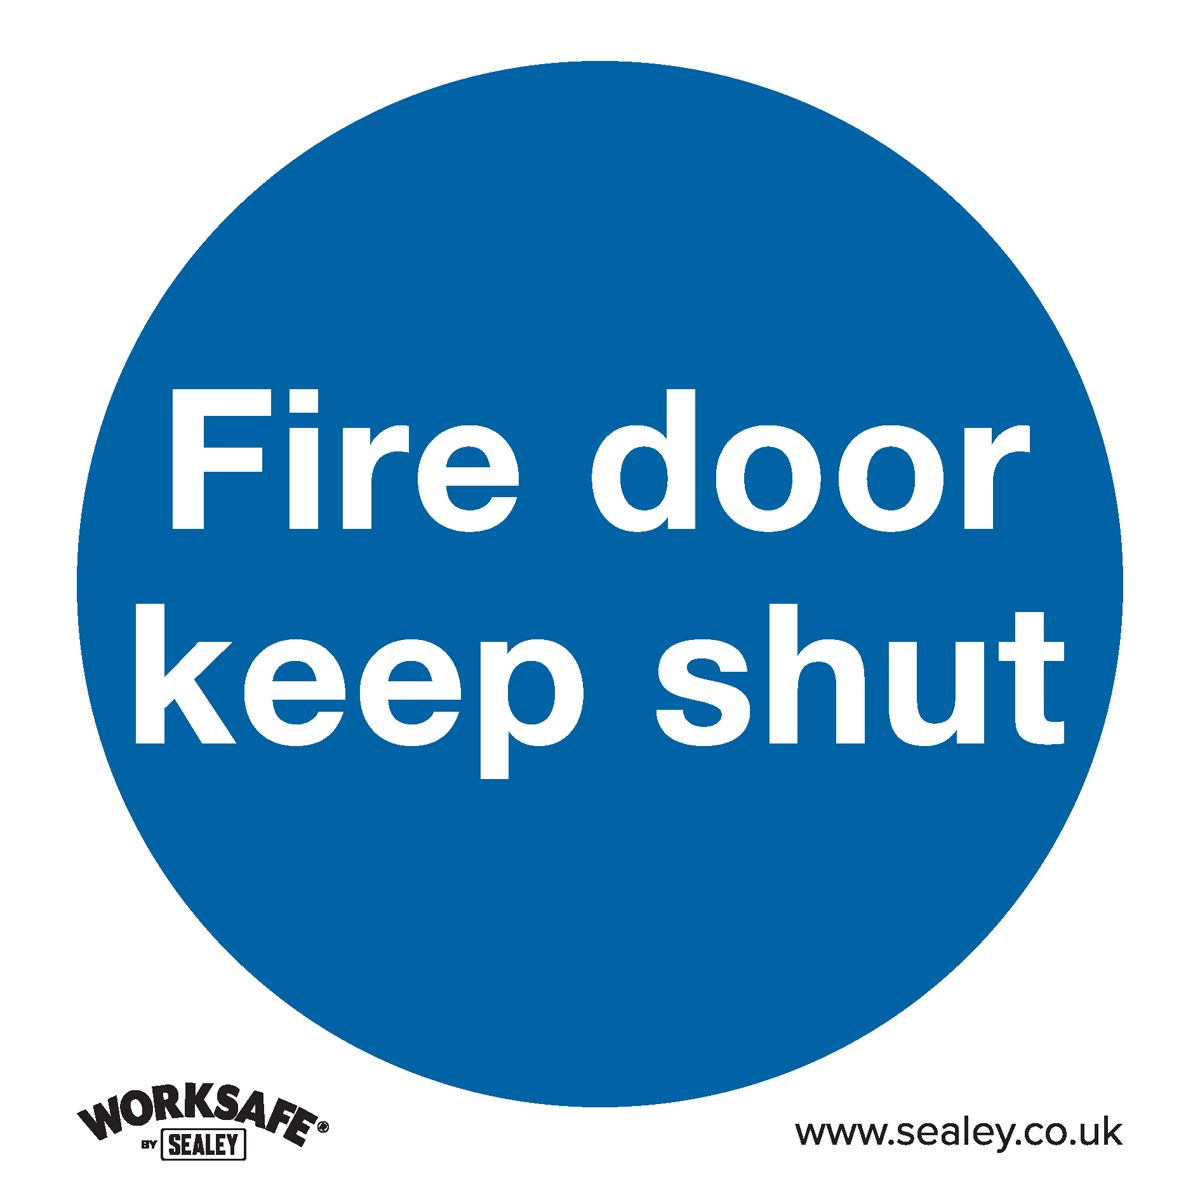 Worksafe by Sealey Mandatory Safety Sign - Fire Door Keep Shut - Rigid Plastic - Pack of 10